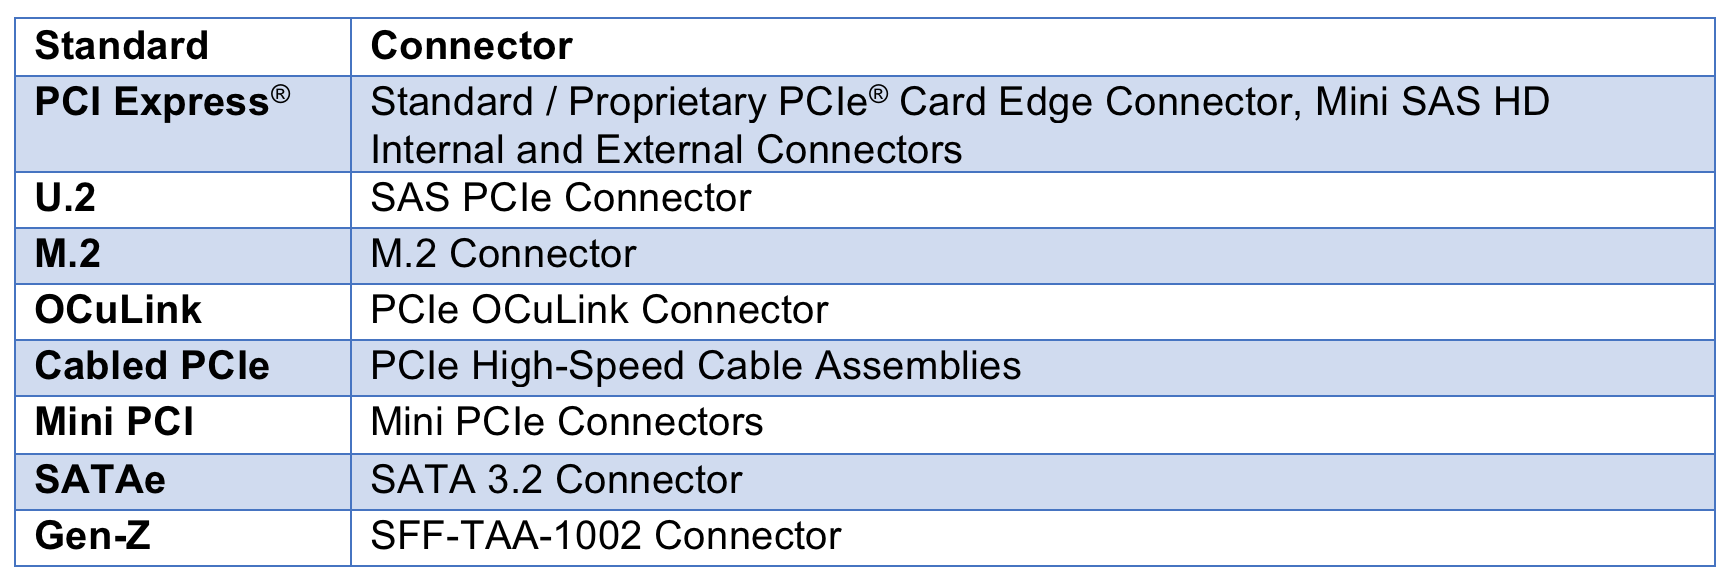 PCIe standards table